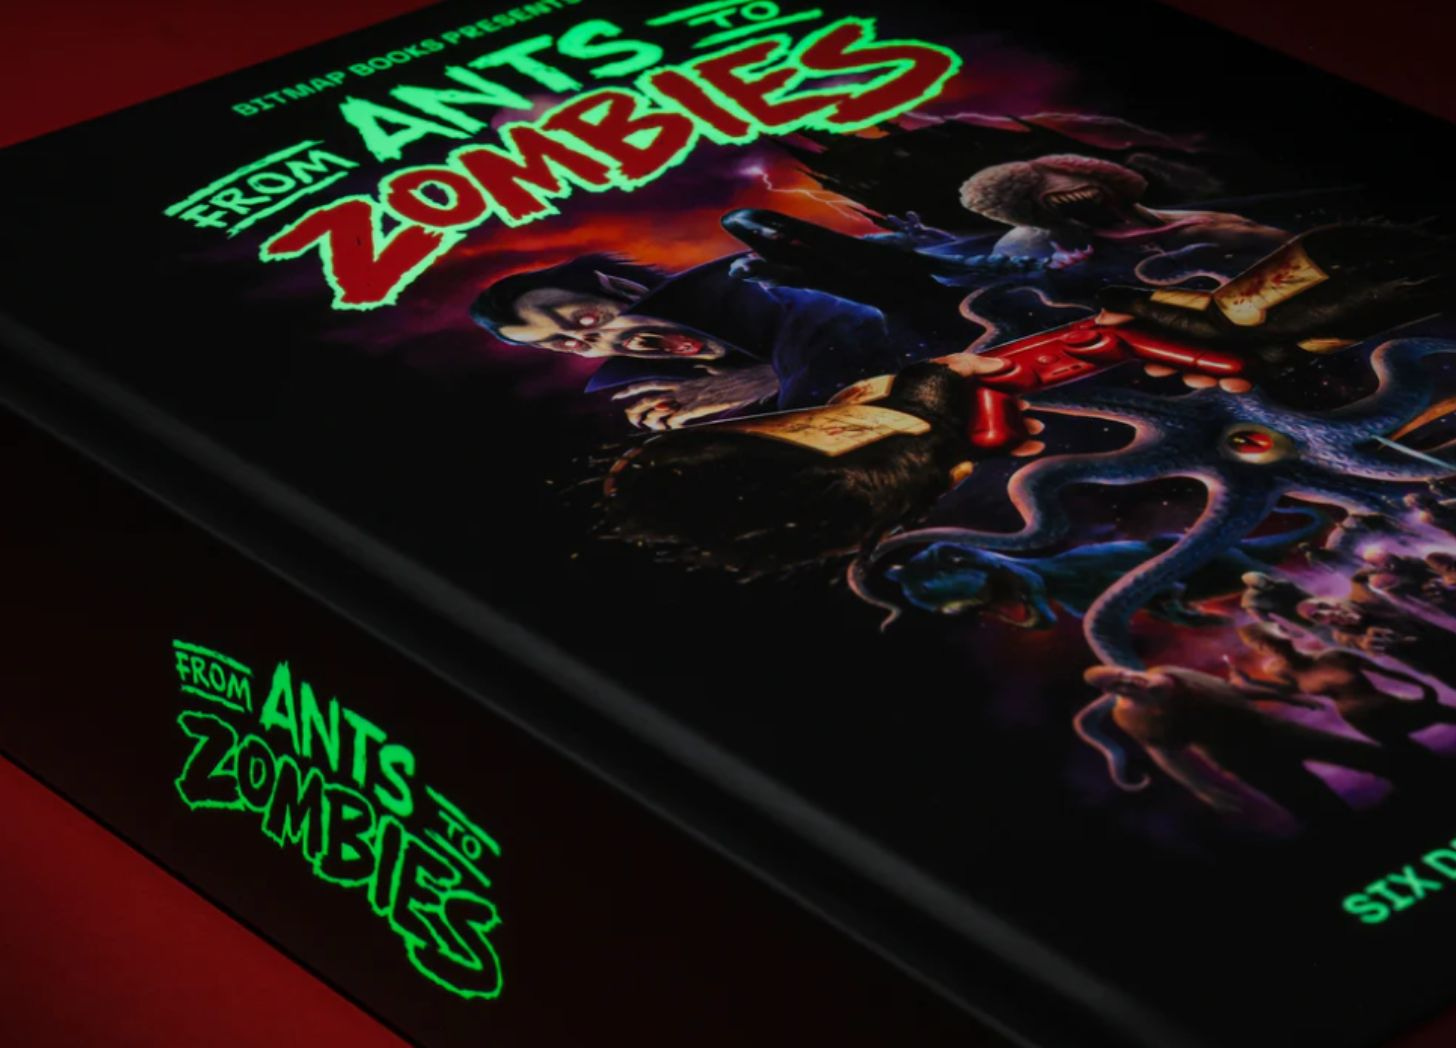 From Ants to Zombies hardcover book cover art and spine